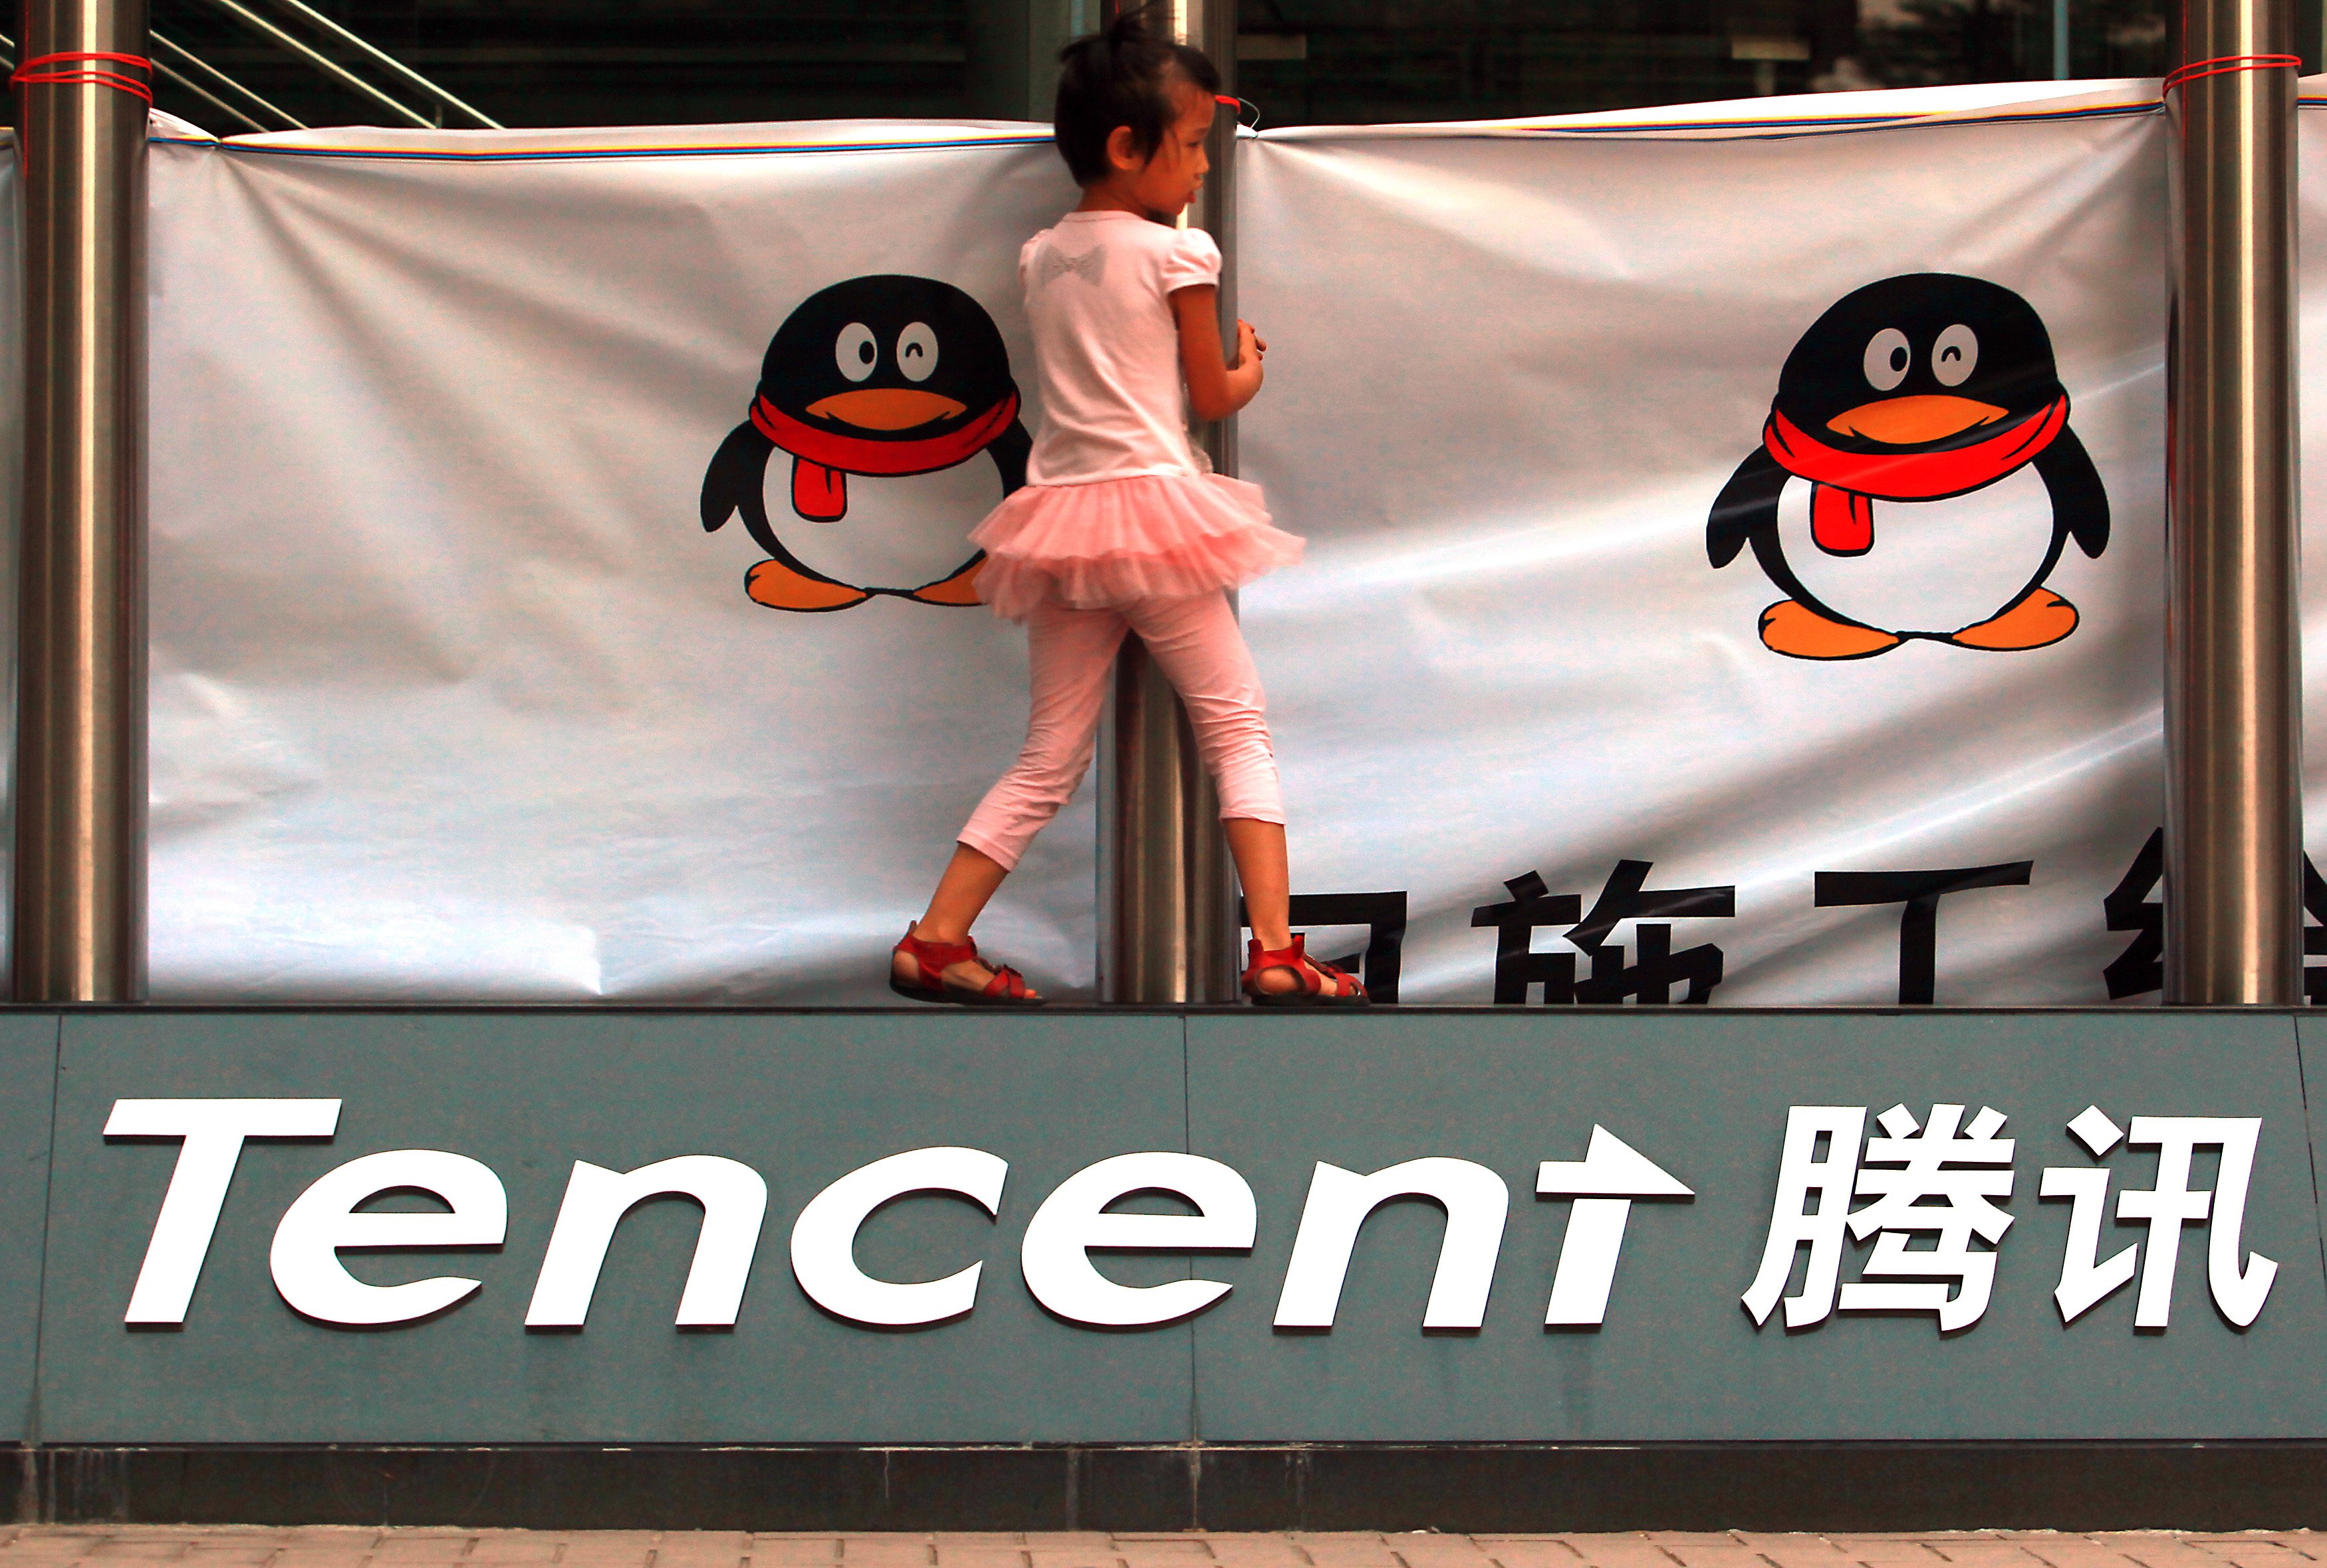 The latest debt offering by Tencent follows the US$8 billion bond sale by rival Alibaba Group in November. Photo: UPI